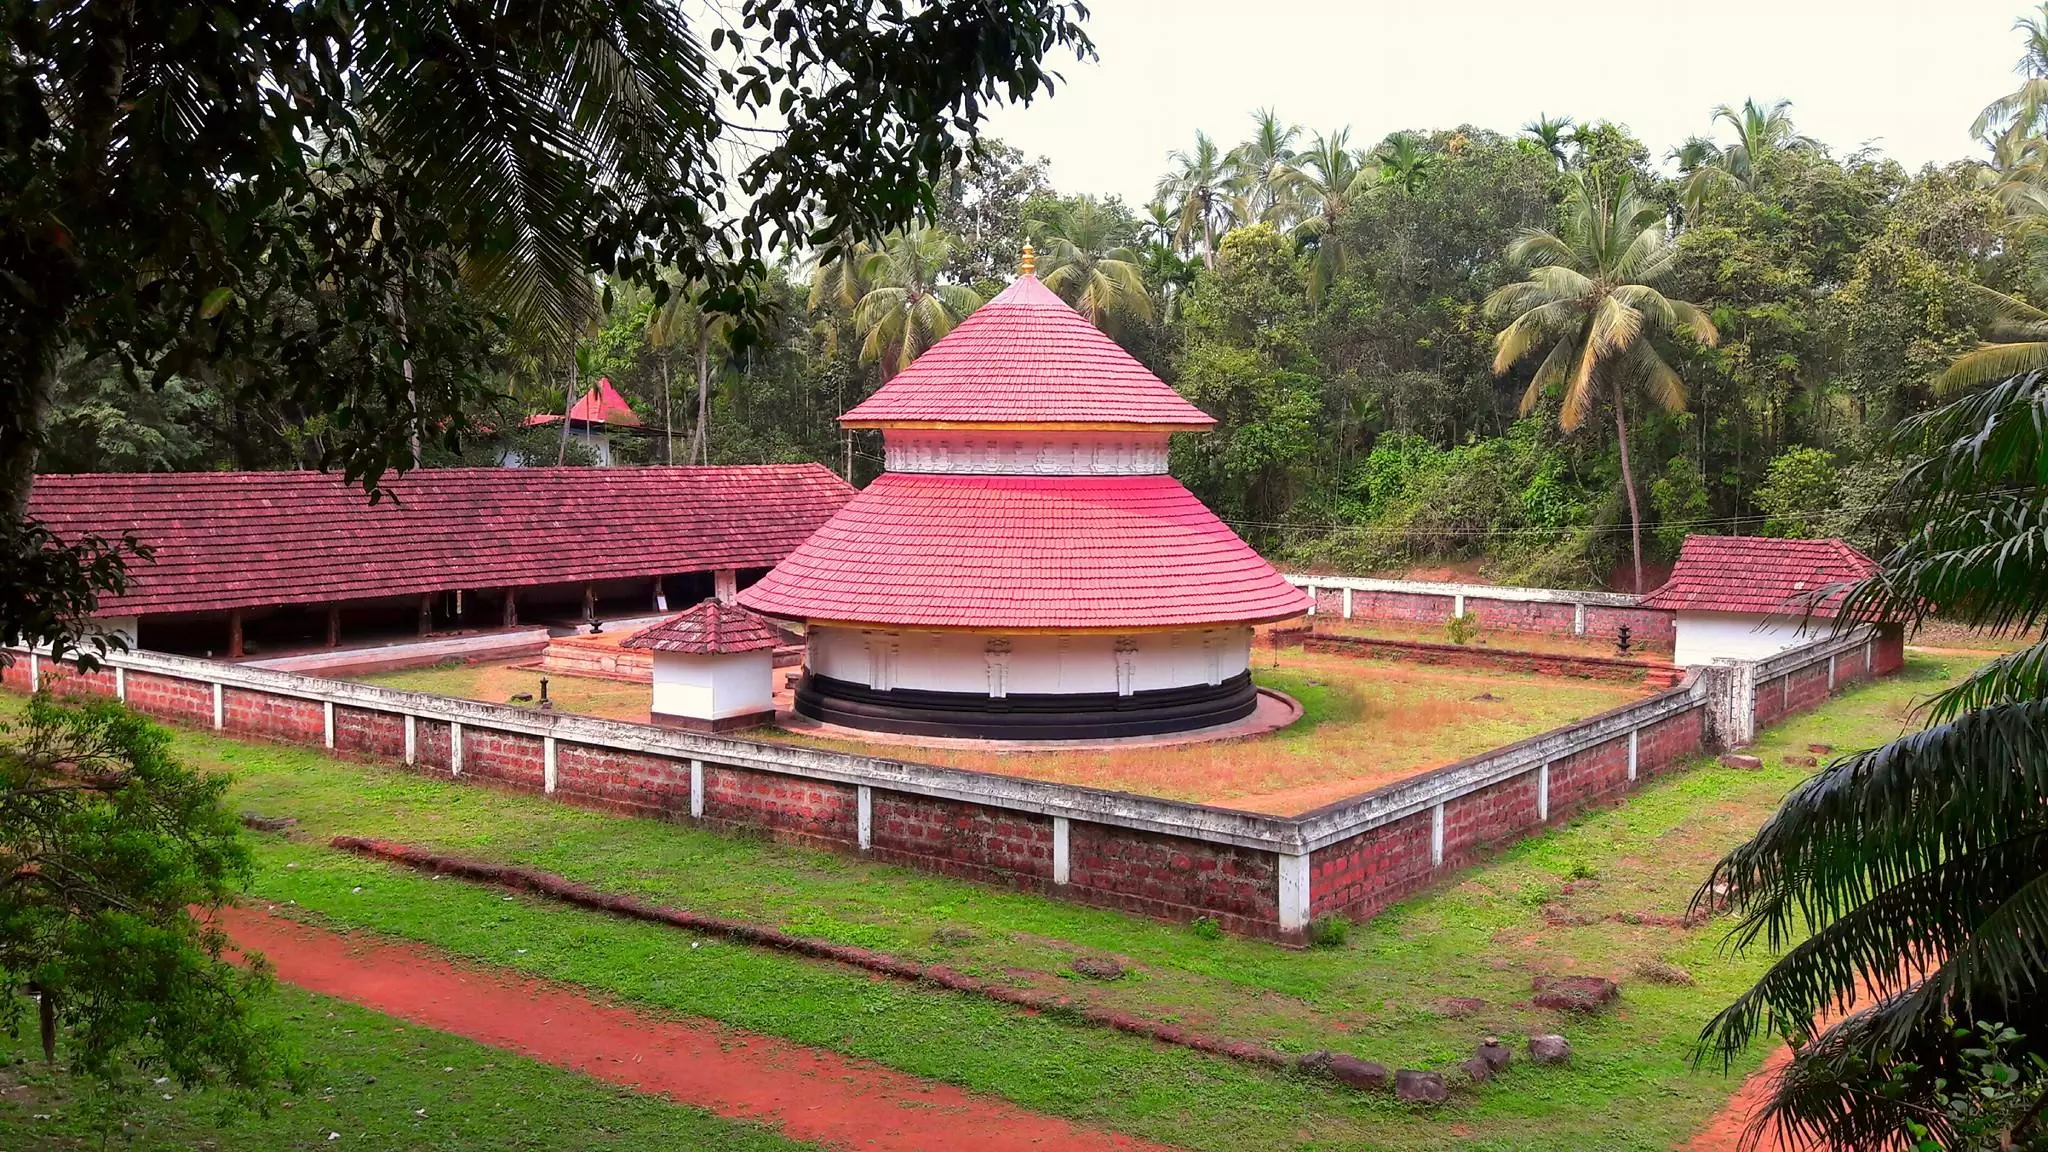 Real ‘Kerala story’: Hindus, Muslims join hands to renovate 400-year-old Durga temple